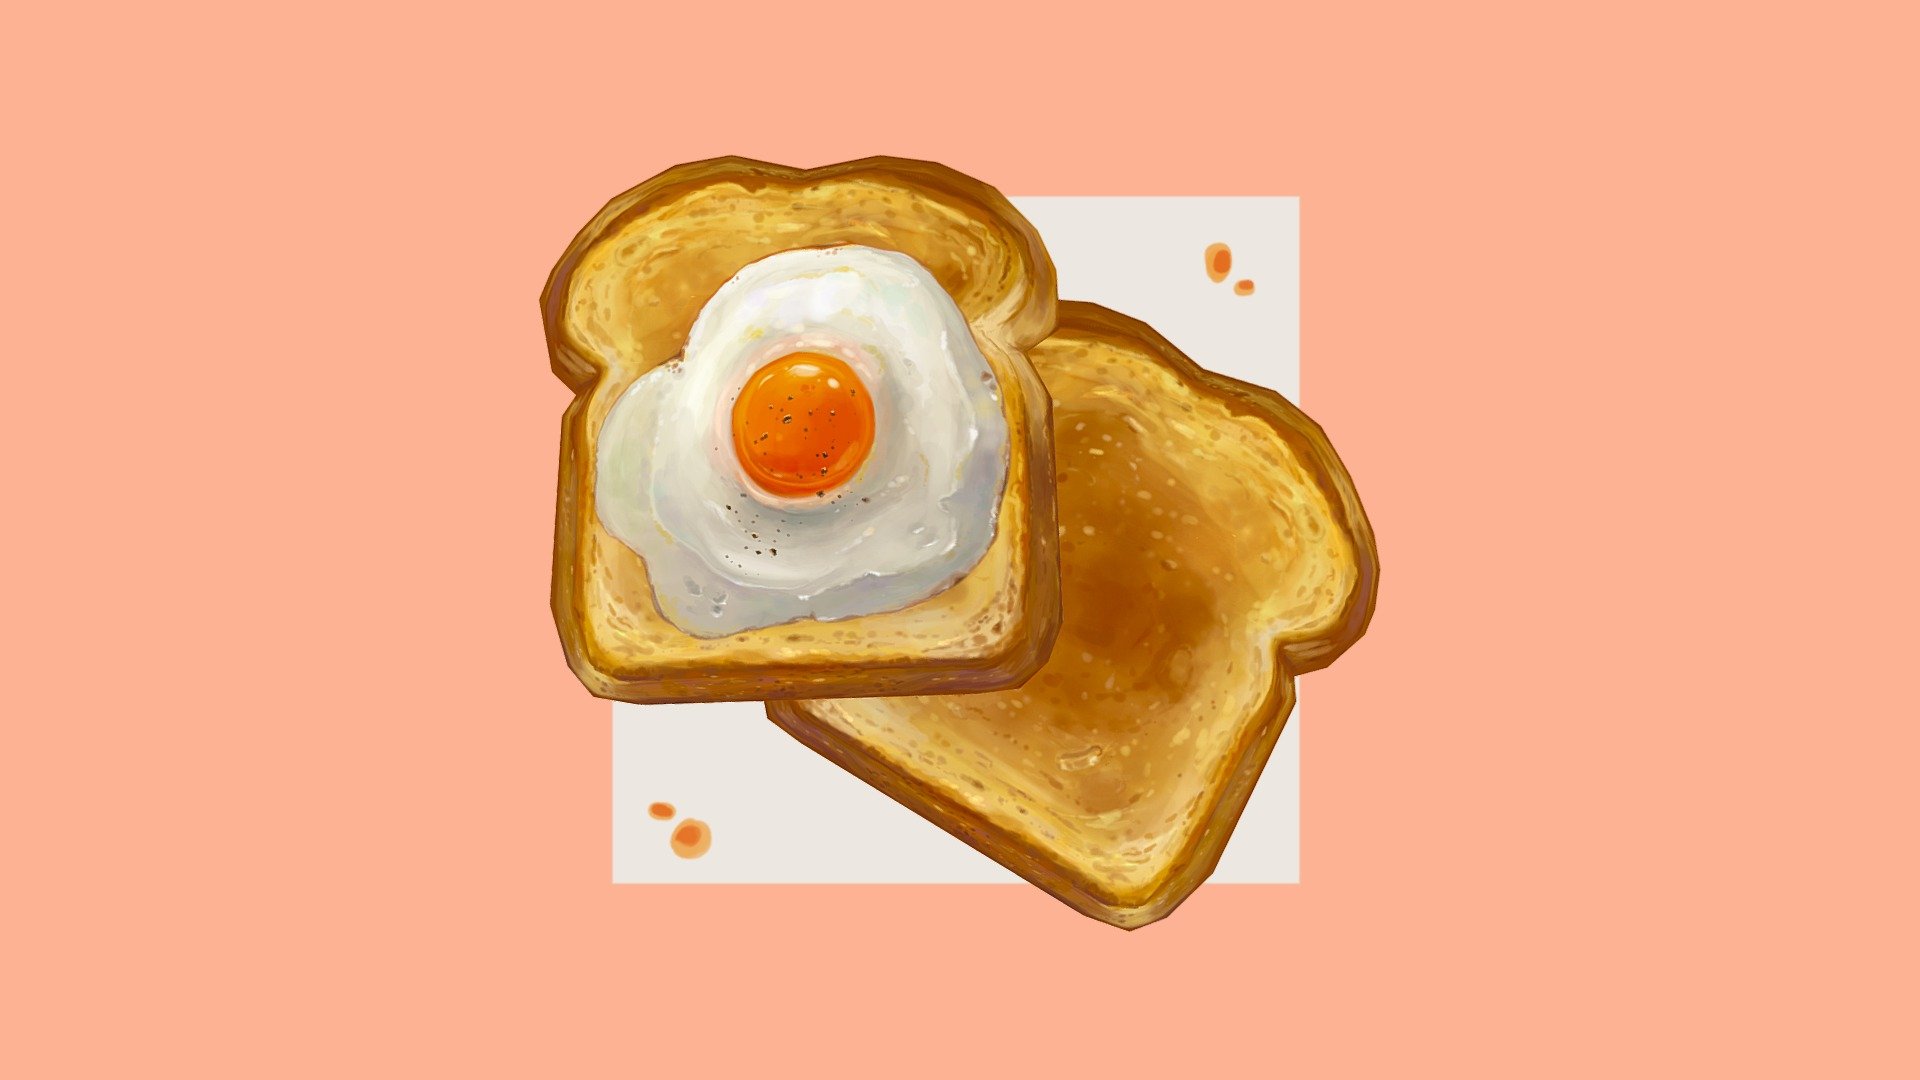 Here are my bread and egg studies in their full glory. 512x512 diffuse textures! - Handpainted Eggs on Toast - Buy Royalty Free 3D model by Curlscurly 3d model